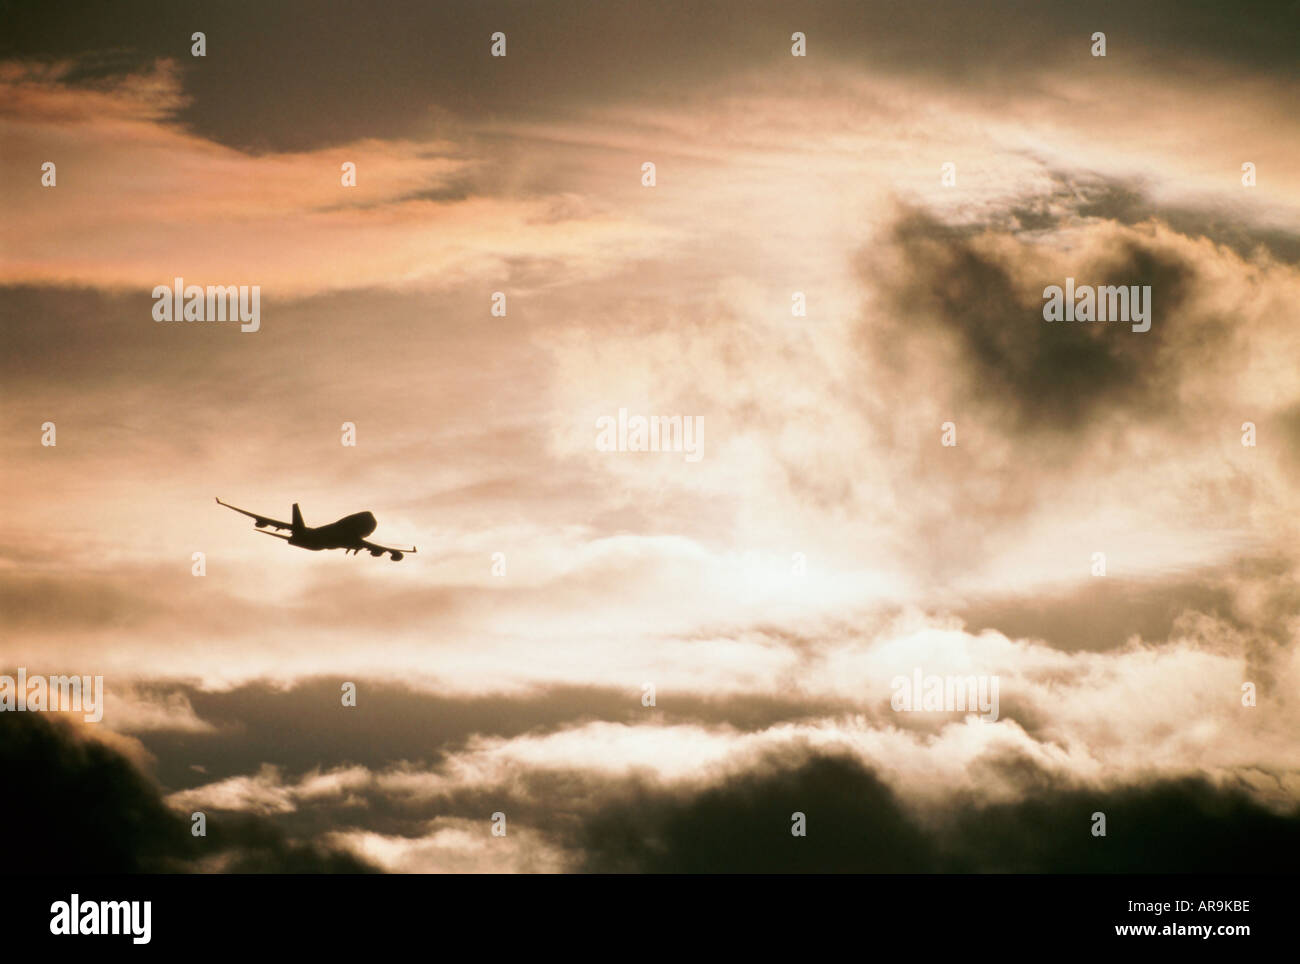 Boeing 747 jumbo jet airliner flying in the air cruising in a cloudy sky at sunset Stock Photo